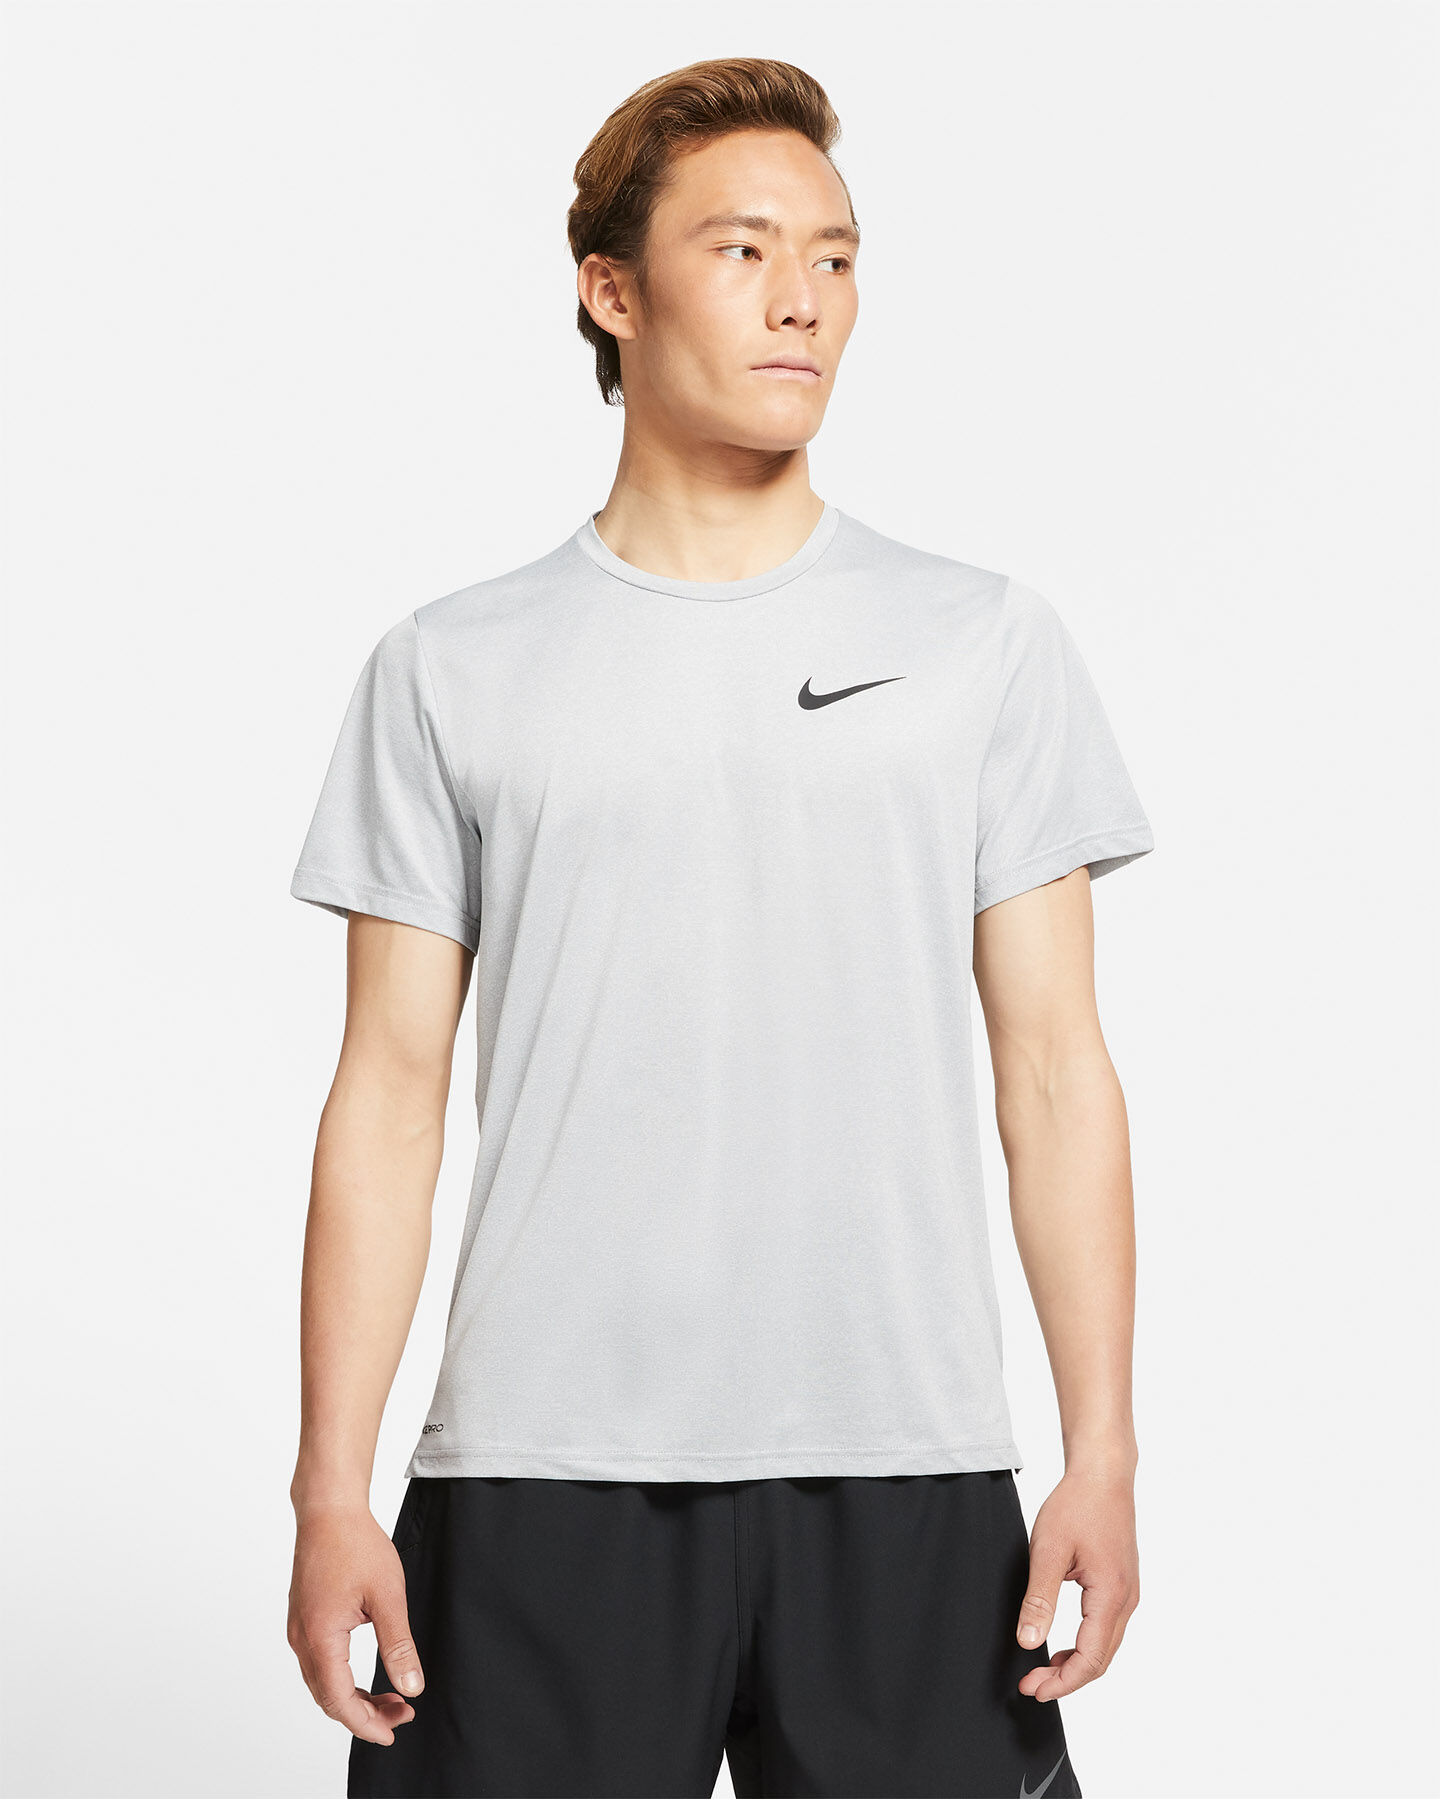  T-Shirt training NIKE HYPER DRY DF M S5269646|073|S scatto 0